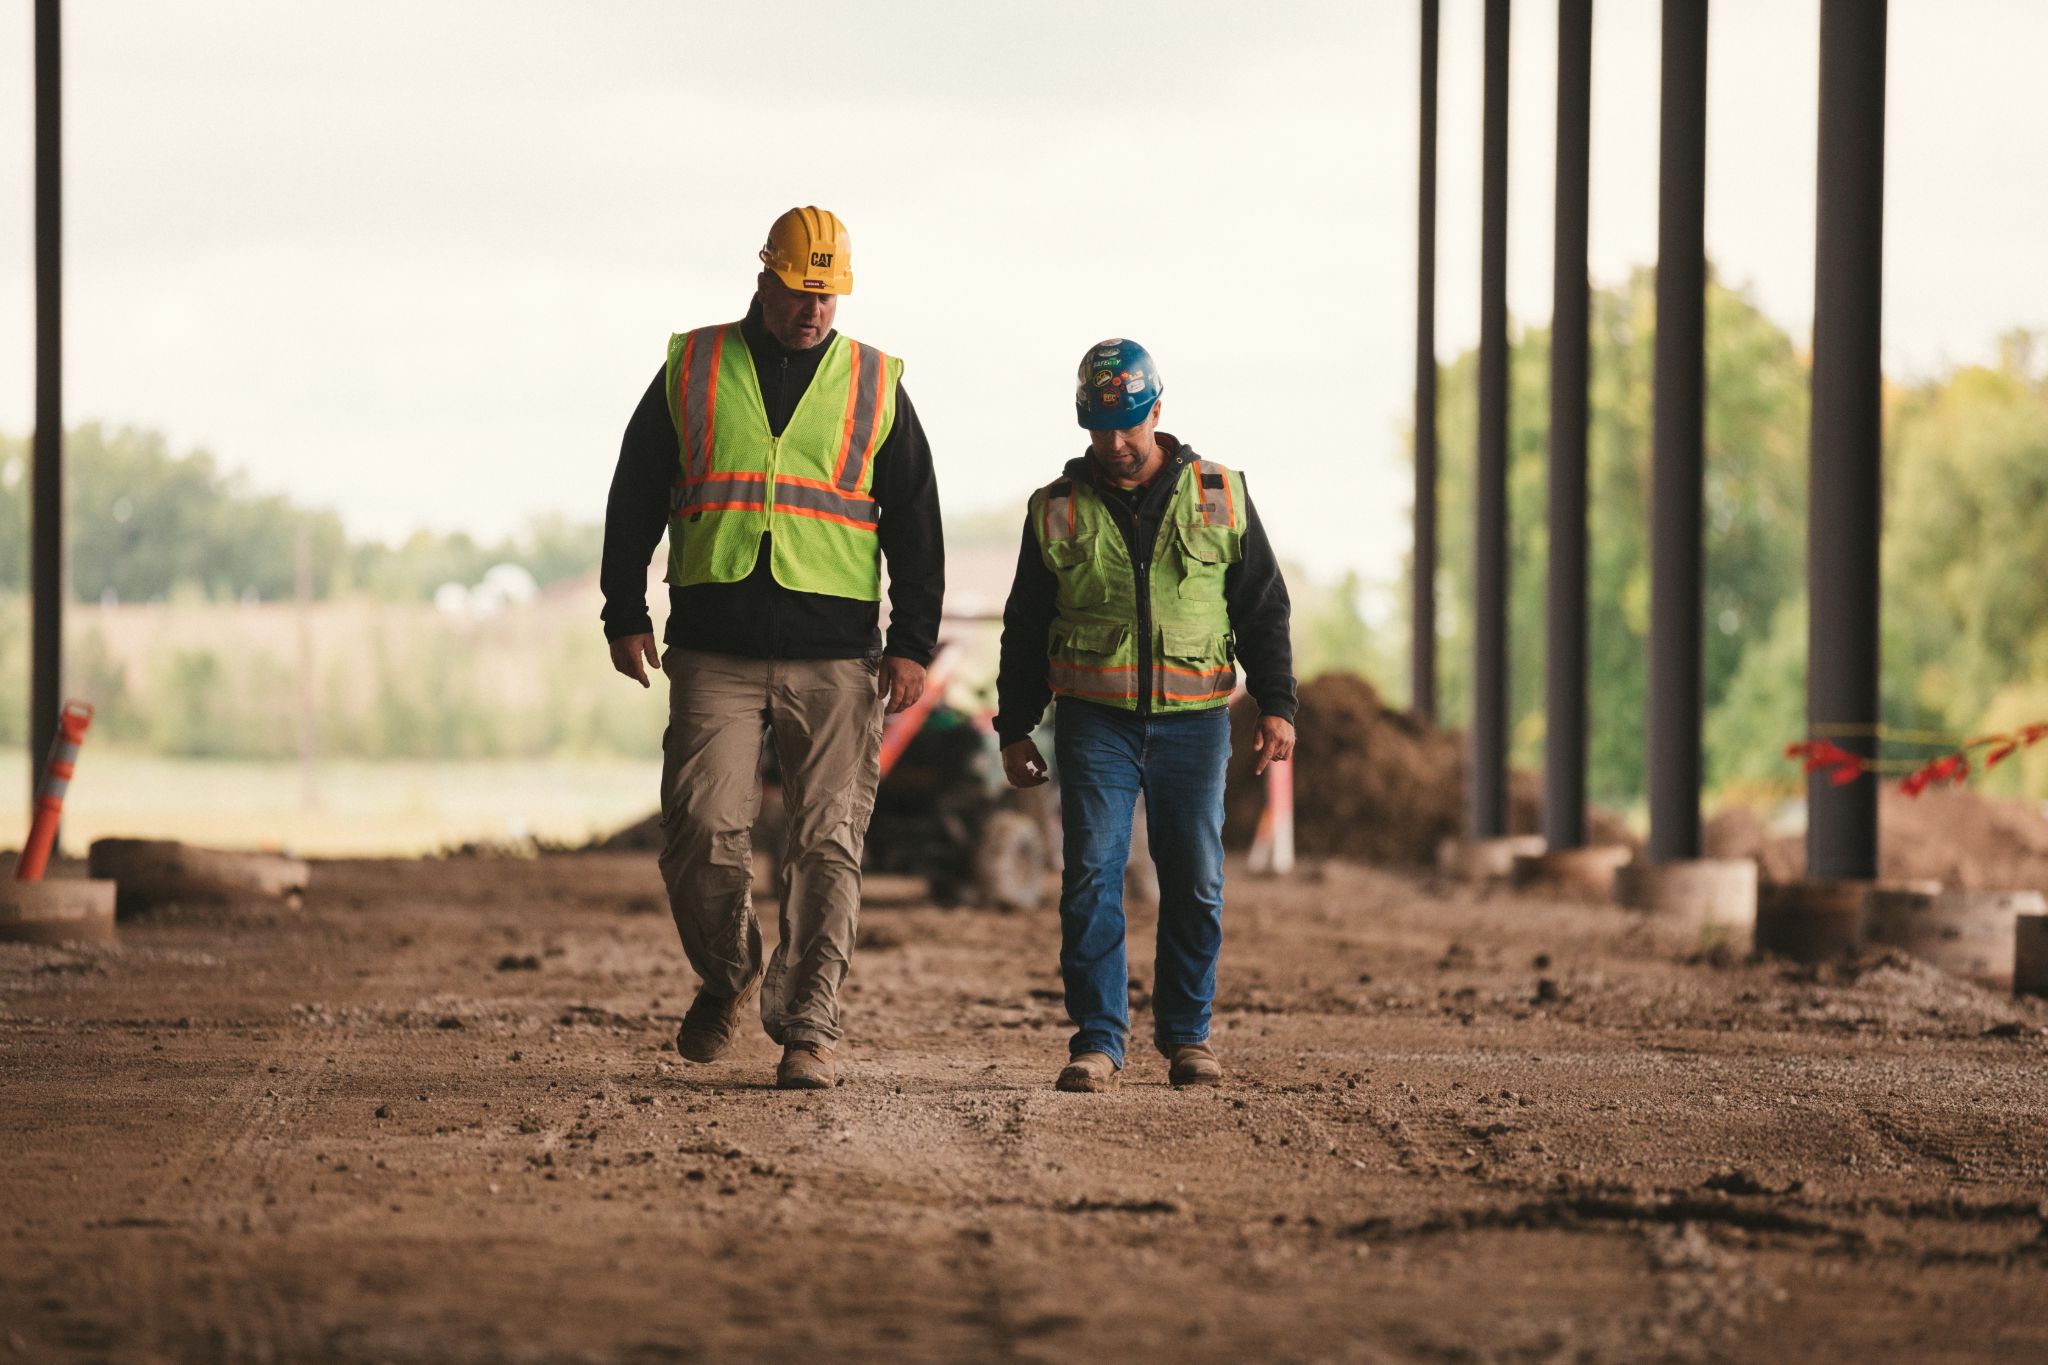 Two construction workers wearing safety vests and yellow and blue hardhats walking through a construction site